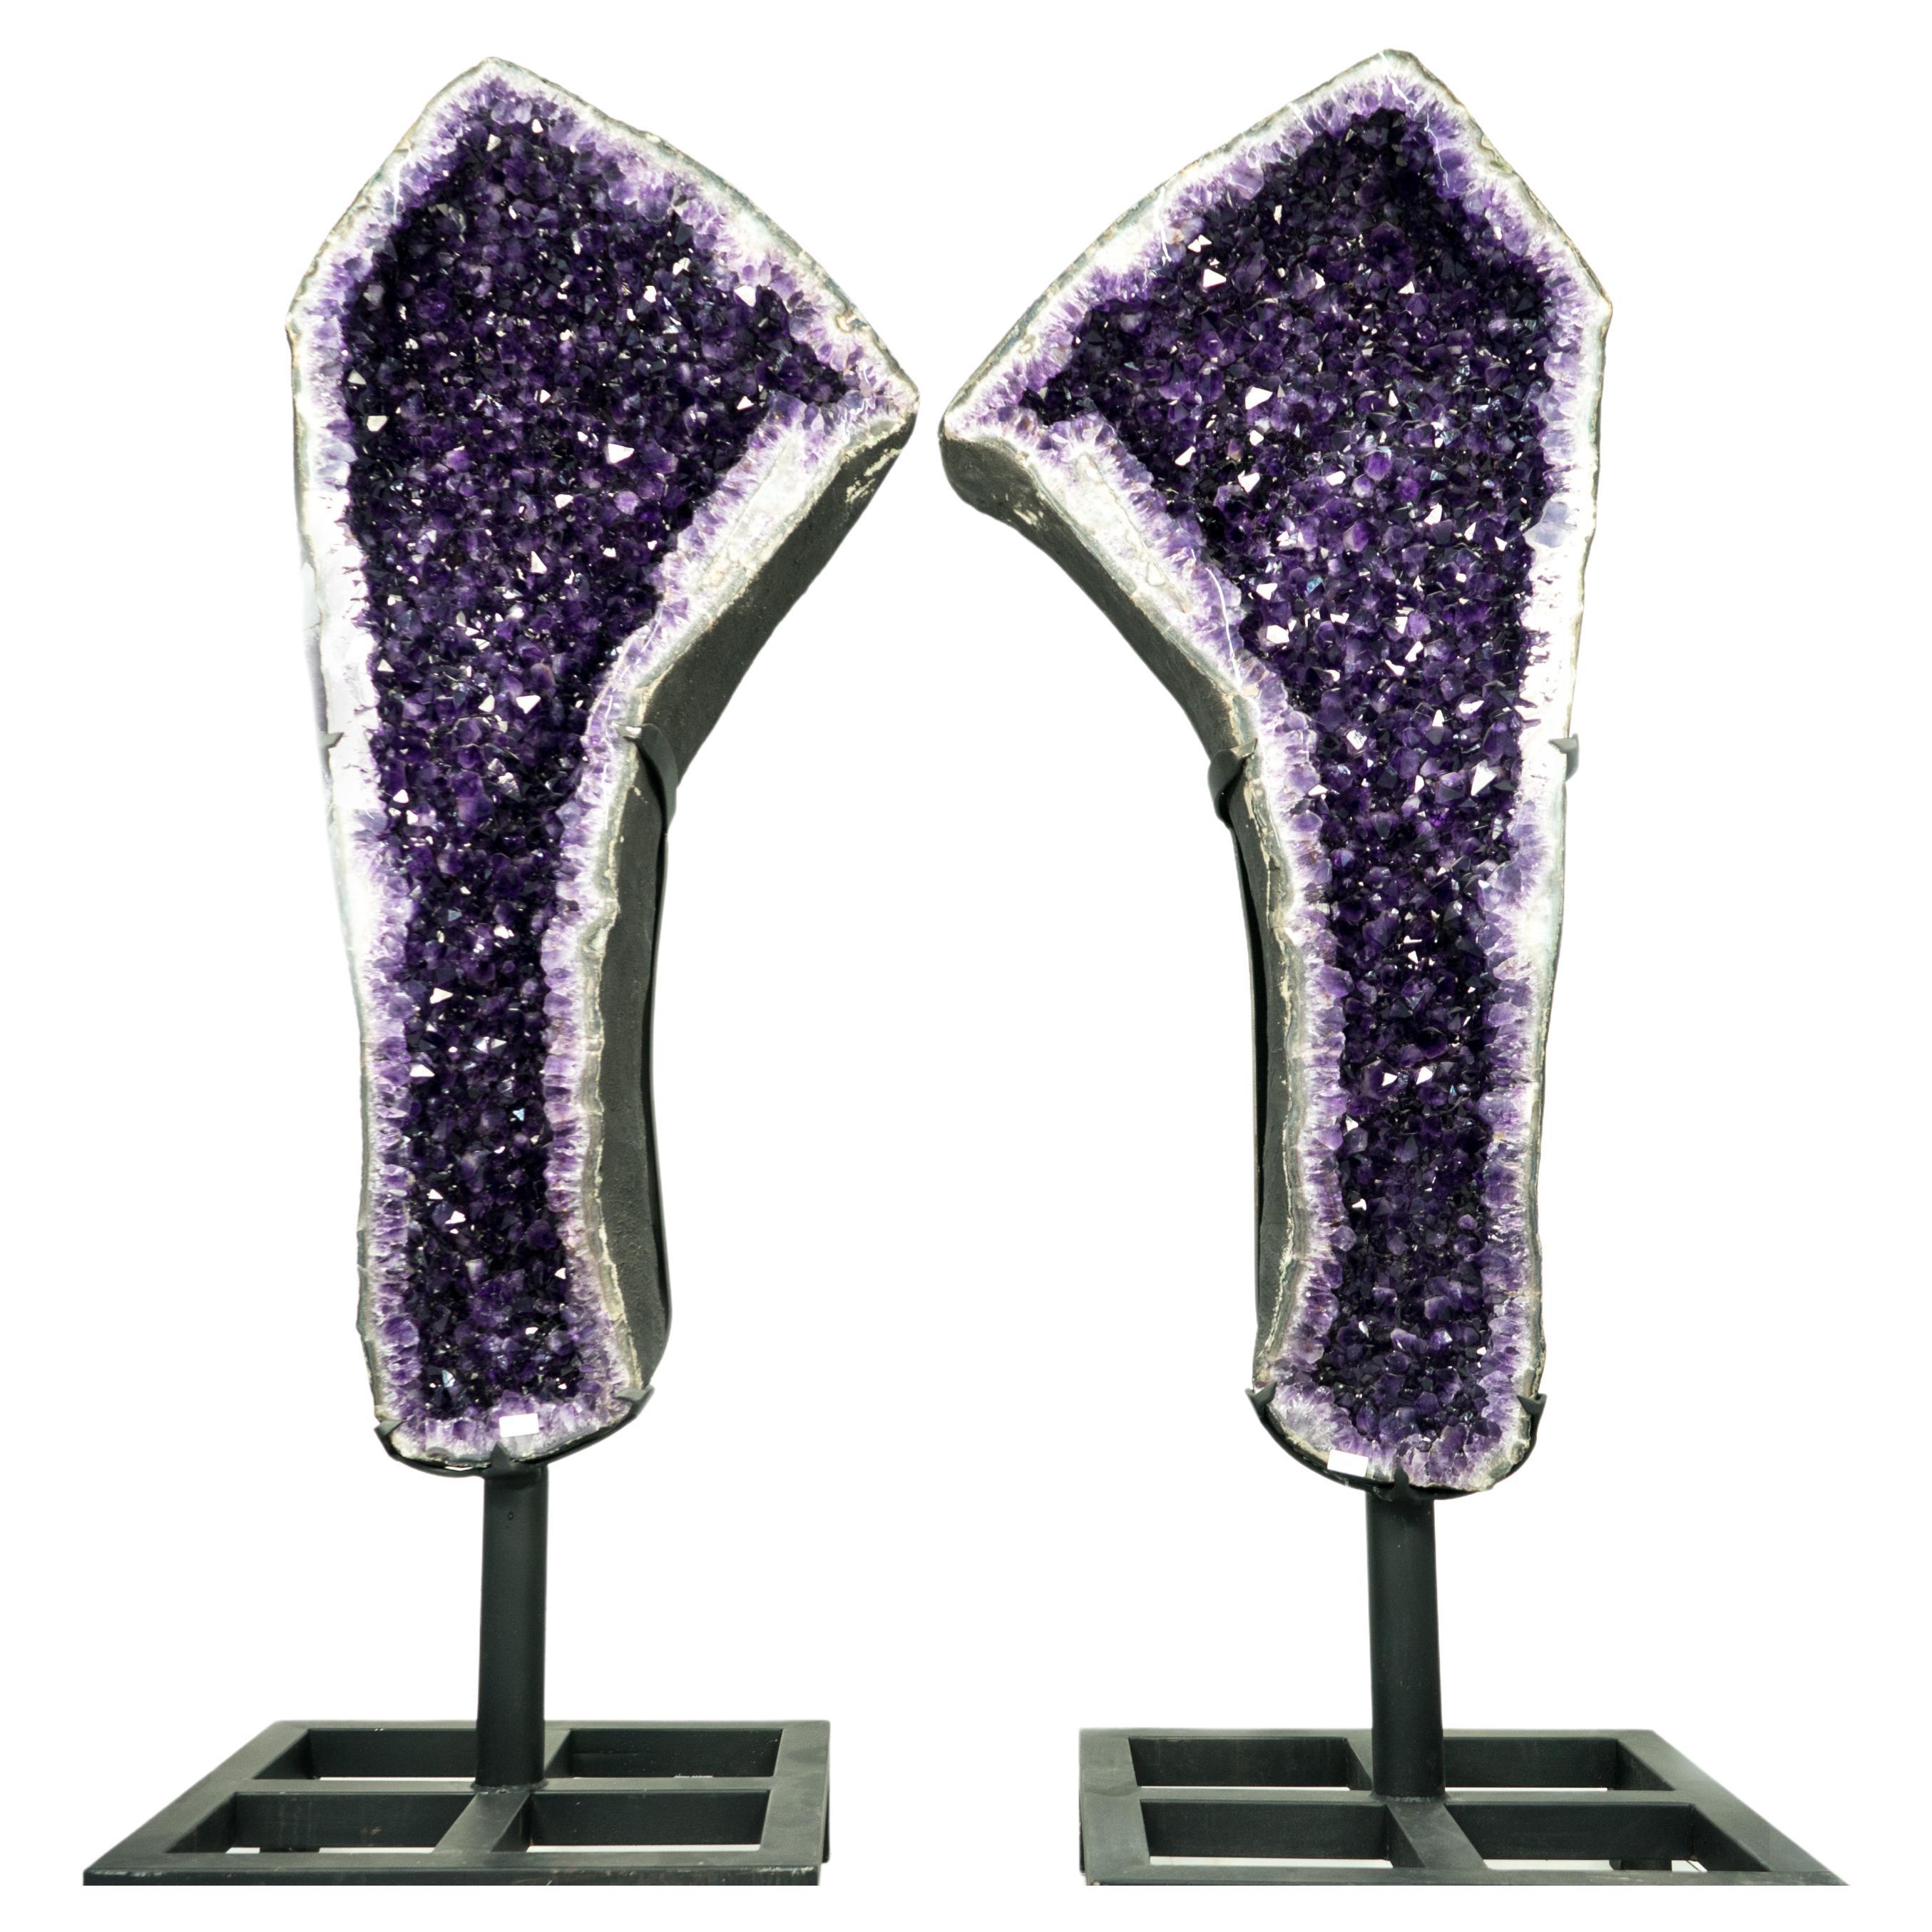 Spectacular 6.9 Ft Tall Pair of Giant Amethyst Geodes AAA Dark Purple Amethyst For Sale